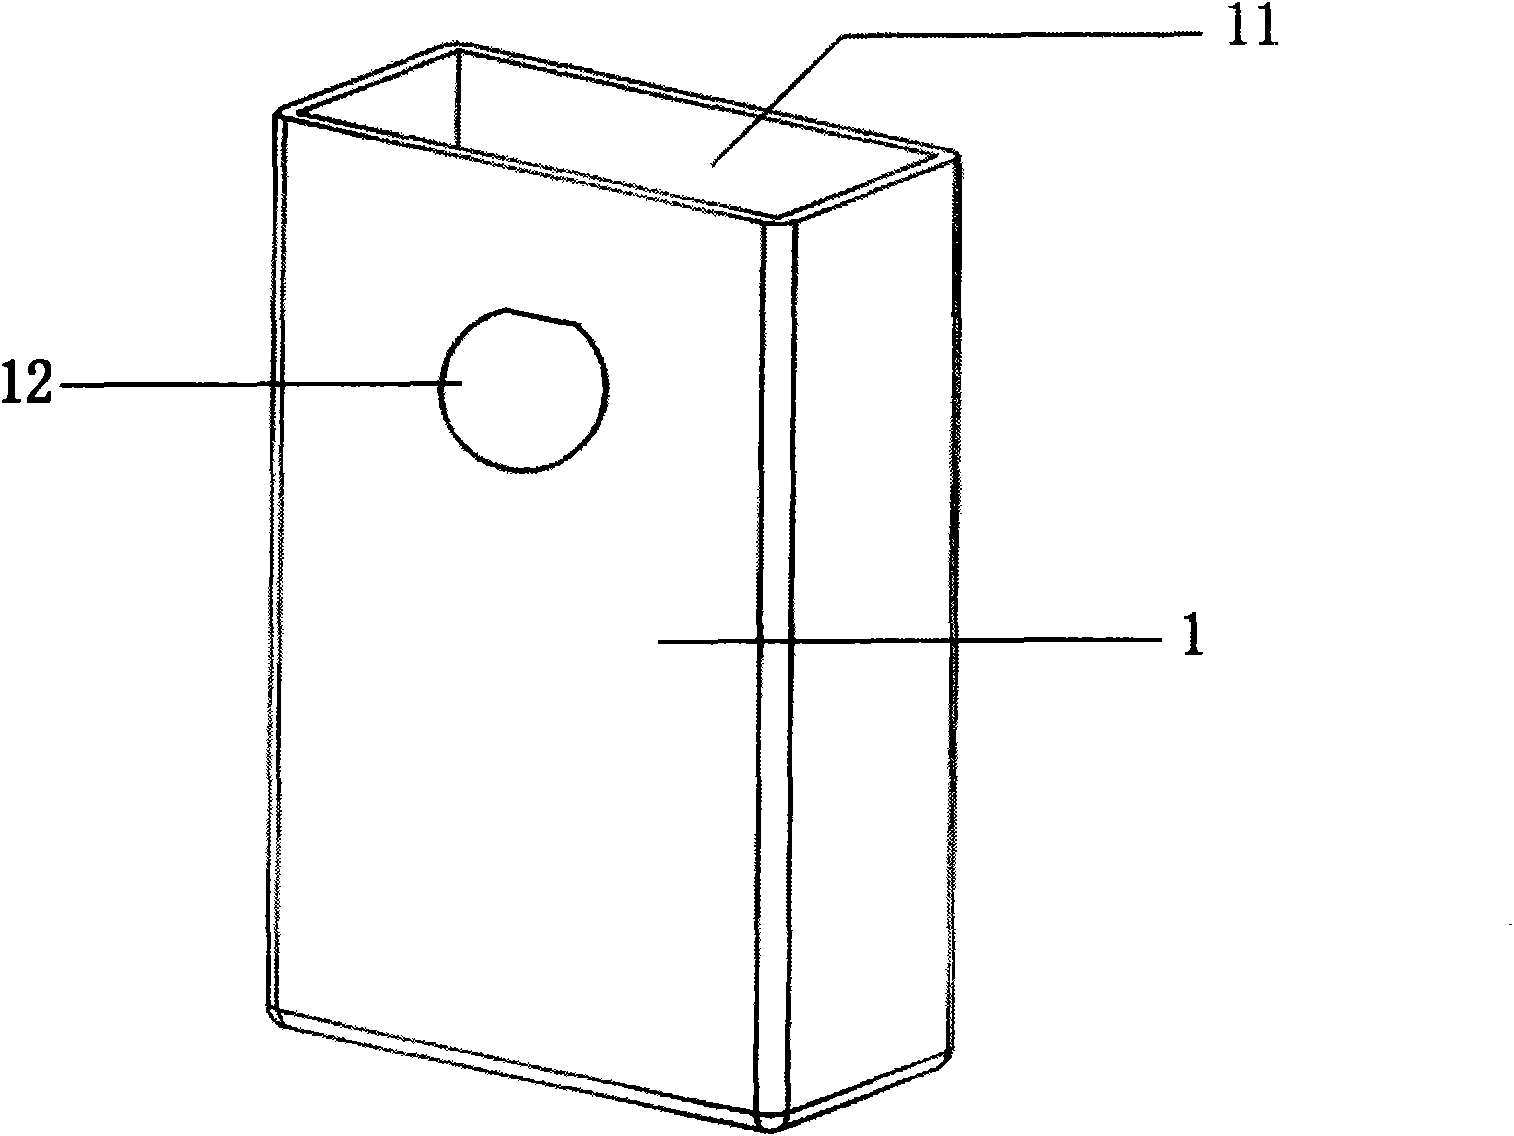 Positioning and cooling device for perforating vertical plane